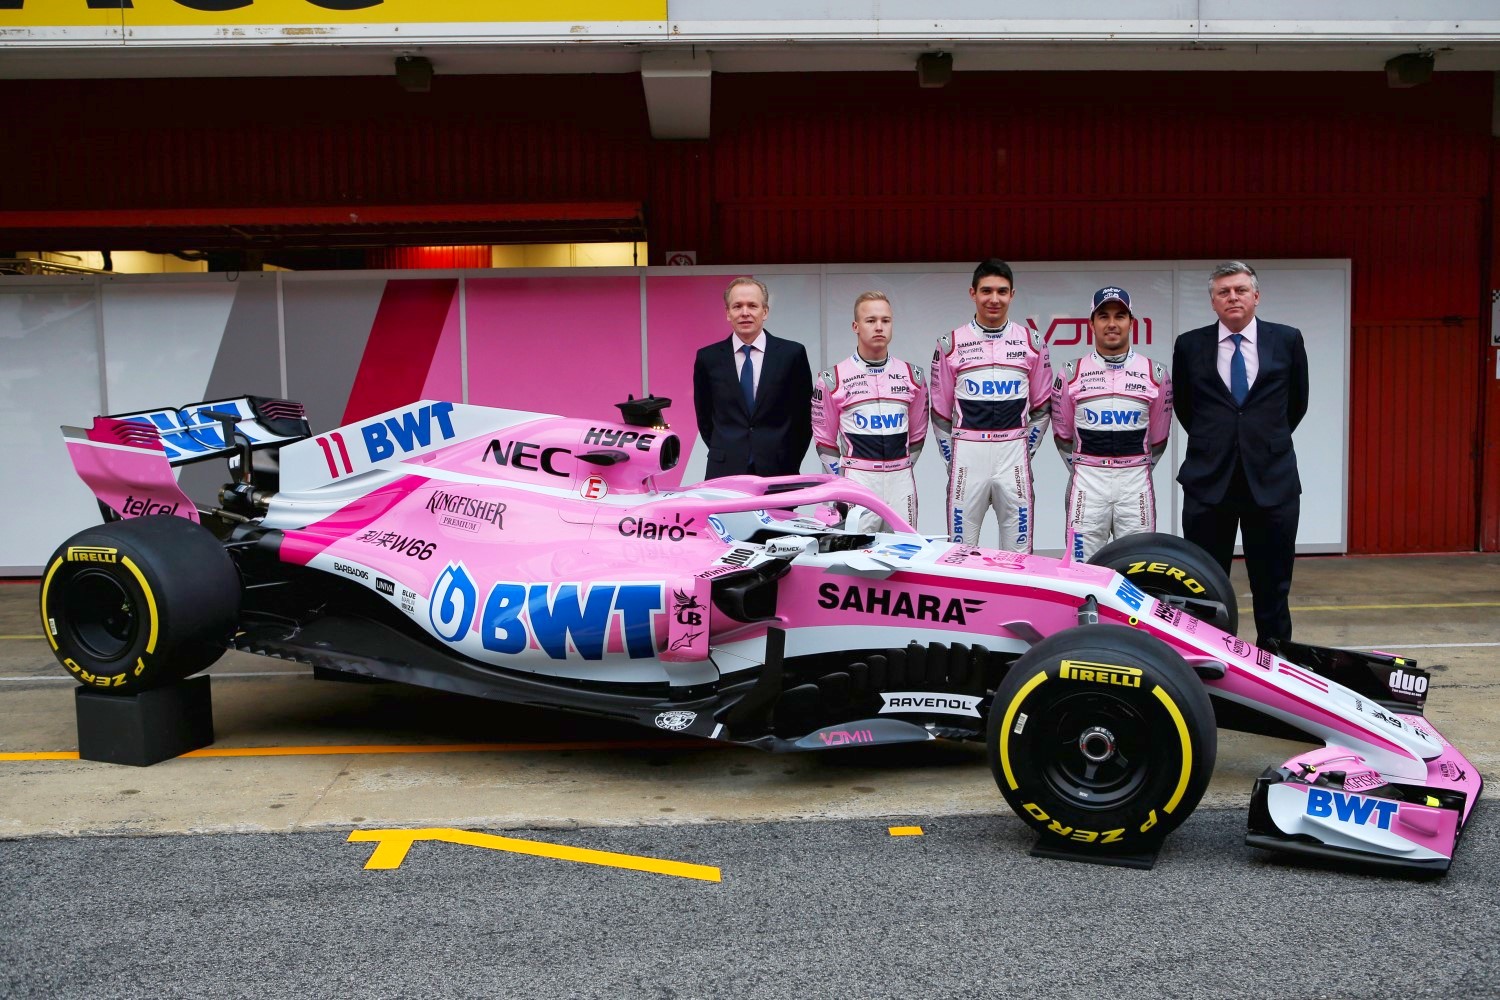 Force India name change in 2019. Does anyone really car what they're called?